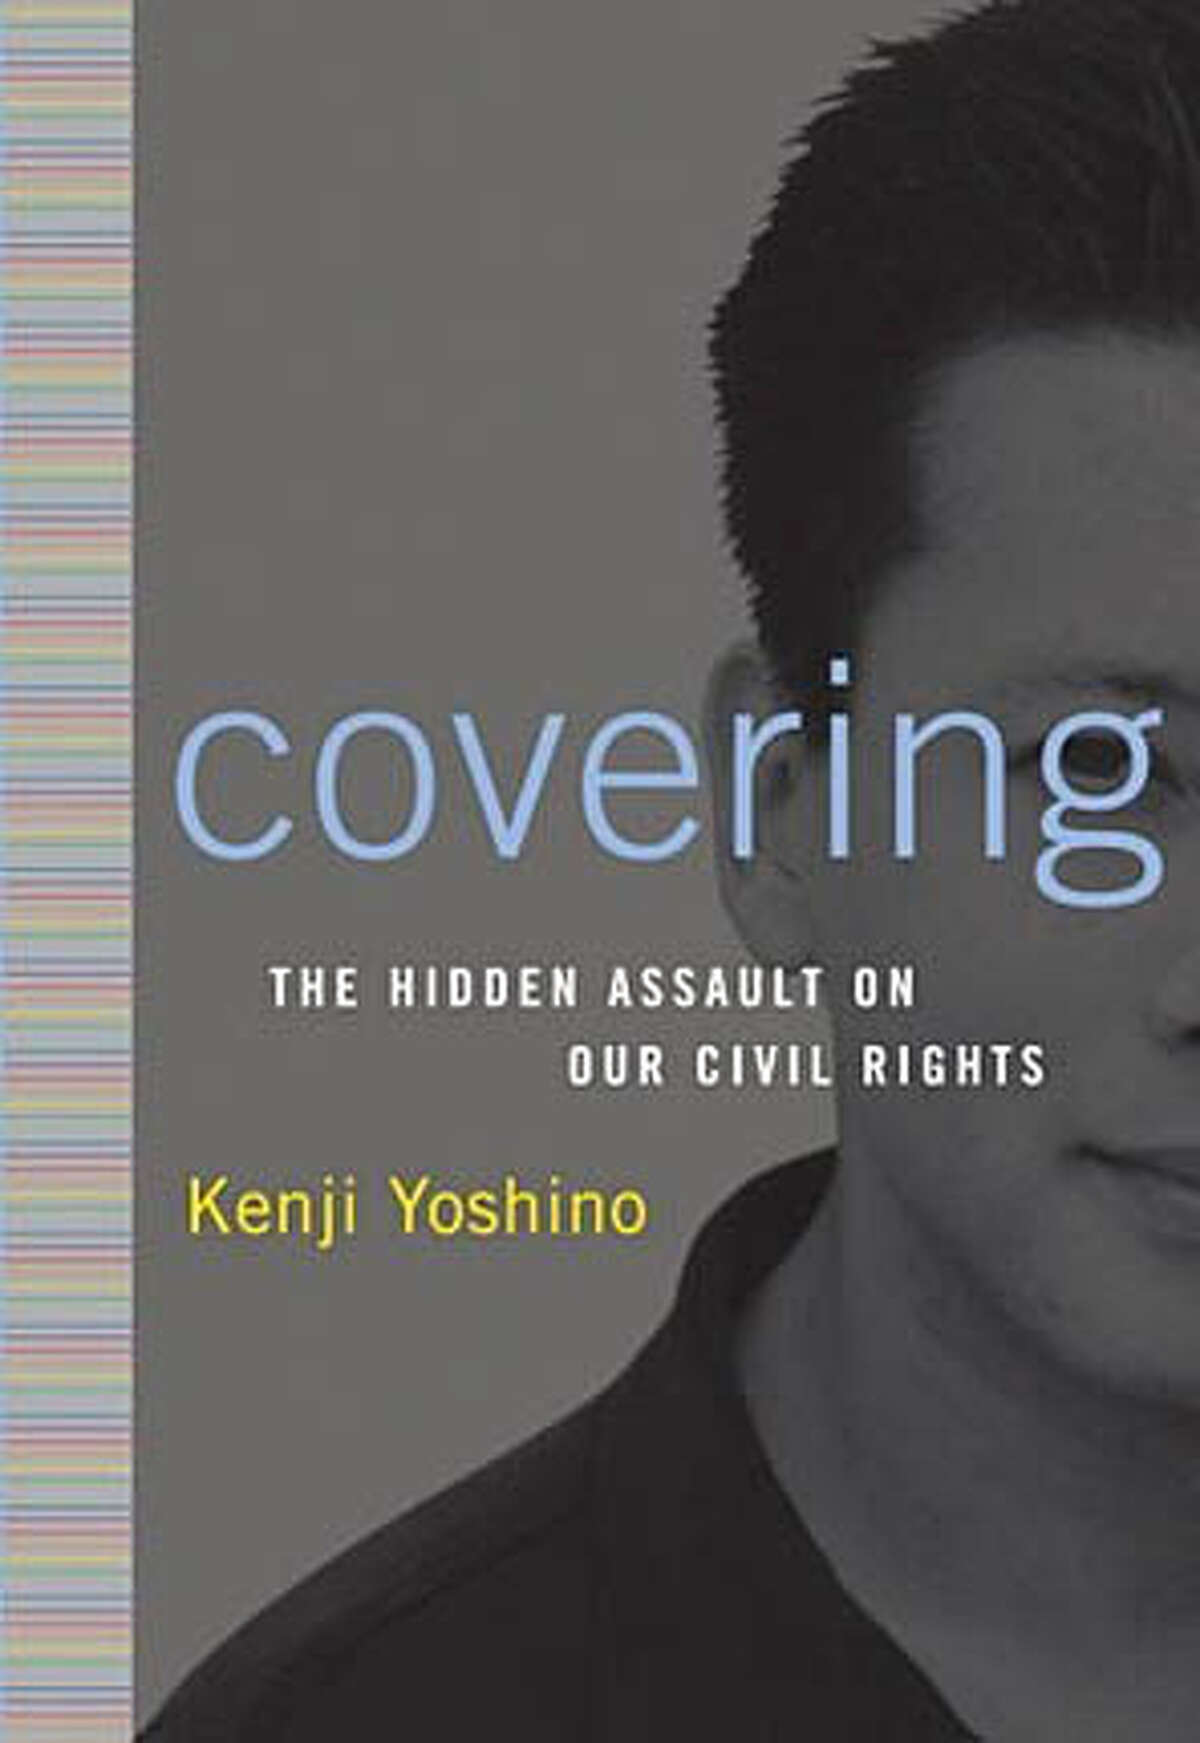 Book cover art for, "Covering" : The Hidden Assault on Our Civil Rights by Kenji Yoshino.